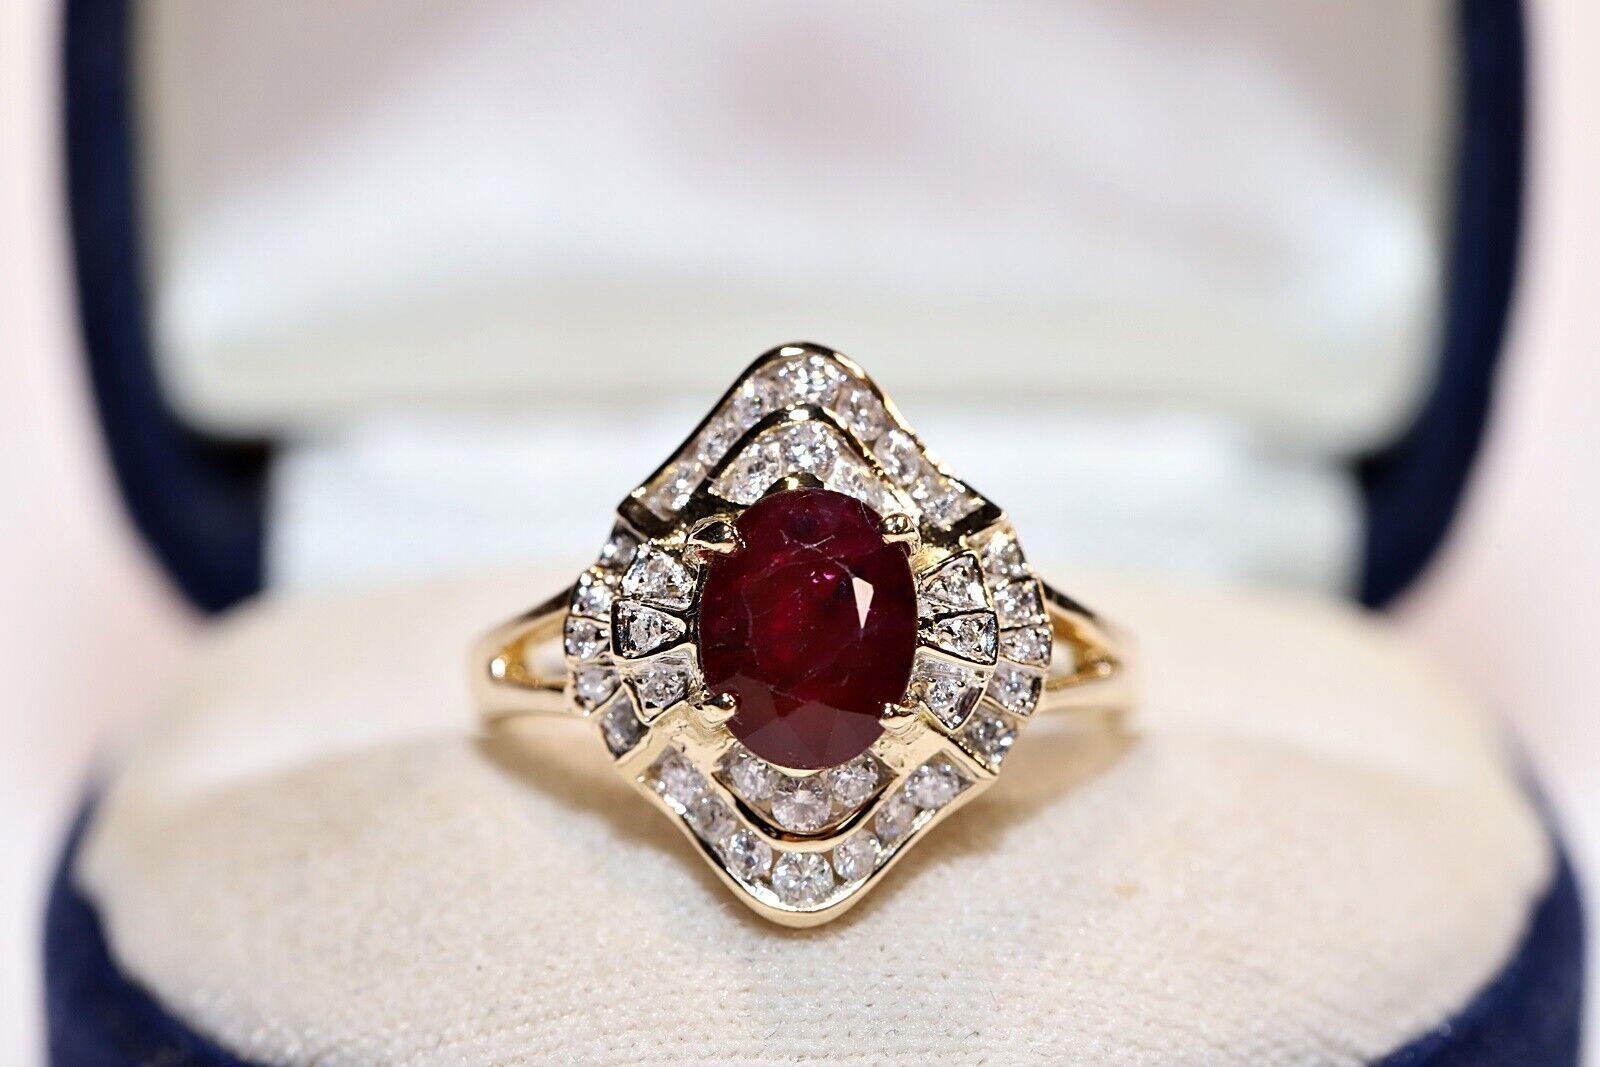 In very good condition.
Total weight is 4.2 grams.
Totally is diamond  0.55 carat...
The diamond is has  G-H color and vs-s1-s2.
Totally is ruby 1 carat.
Ring size is US 7.5 (We offer free resizing)
We can make any size.
Please contact for any